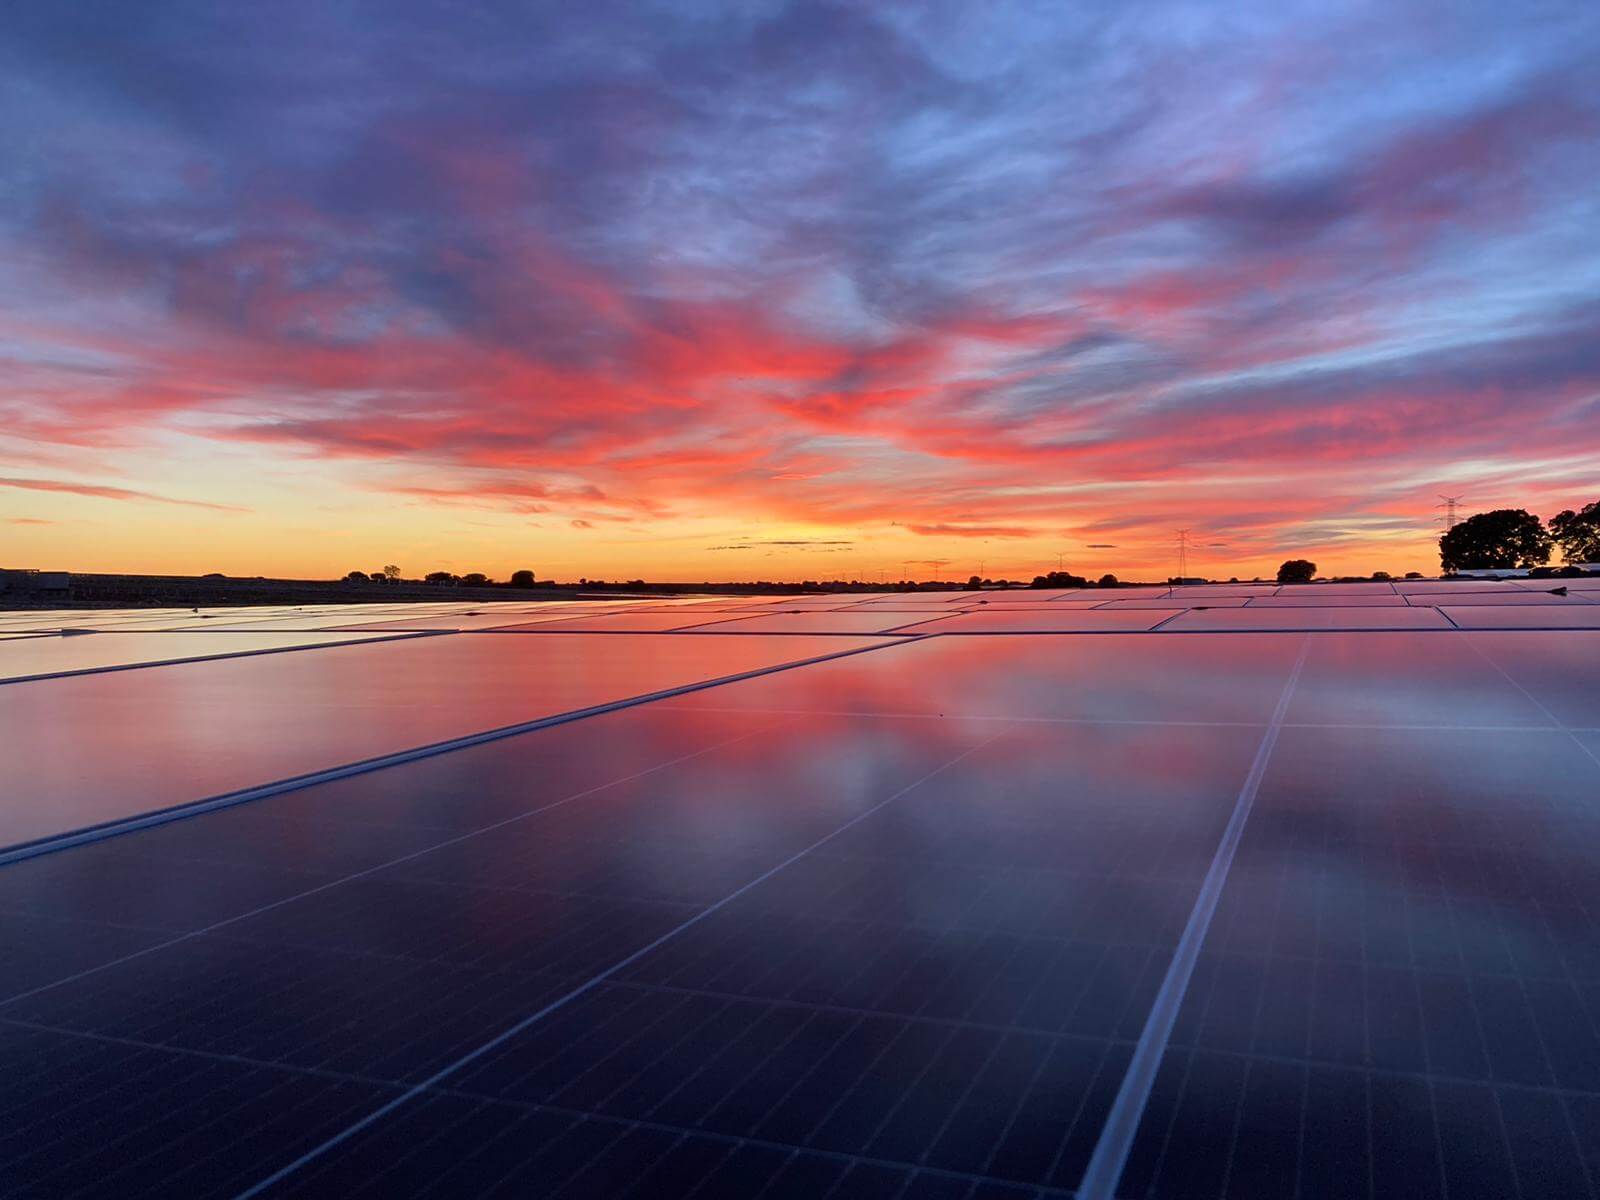 Solaria leads photovoltaic solar energy production in Iberia and obtains EISs for 375 MW in Portugal